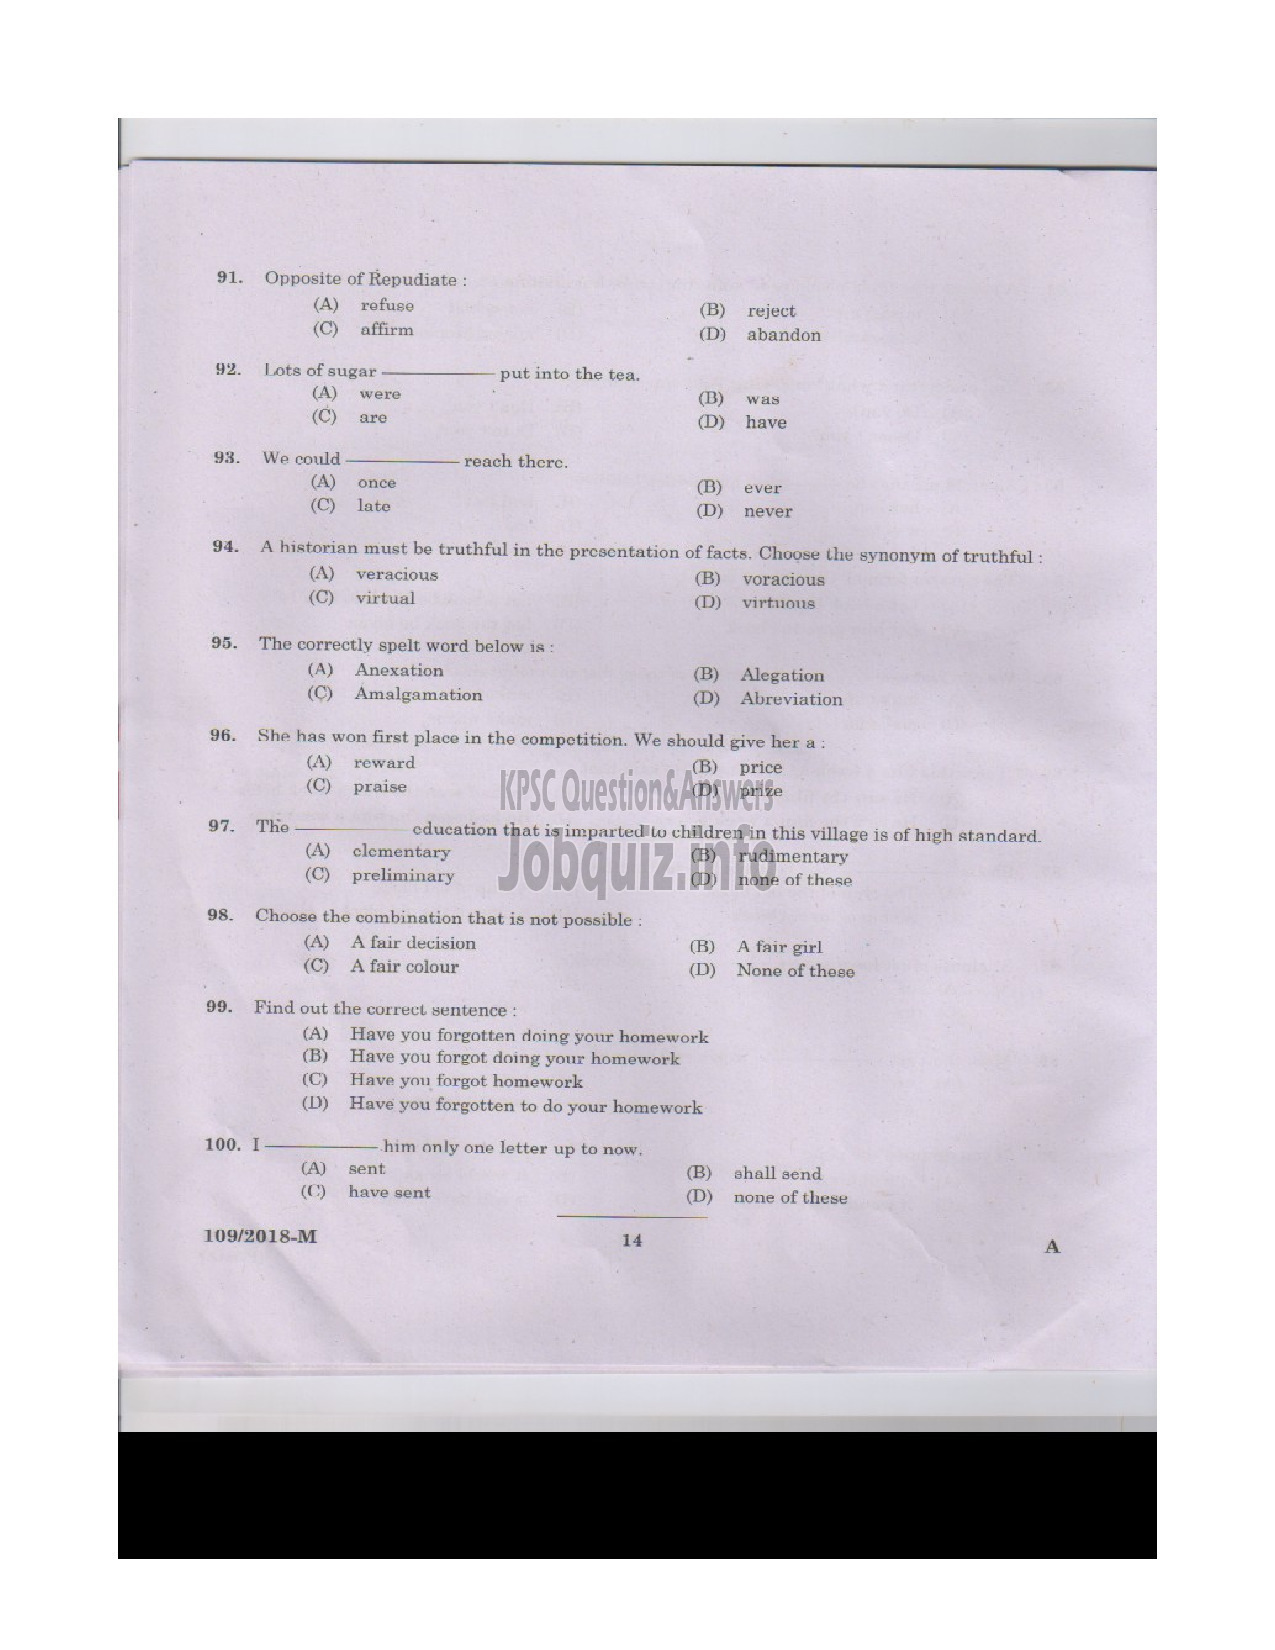 Kerala PSC Question Paper - ATTENDER GR II LIGHT KEEPER SIGNALLER CLERICAL ATTENDER FEMALE ASSISTANT PRISON OFFICER LAB ATTENDER HOMOEOPATHY Malayalam/English -13